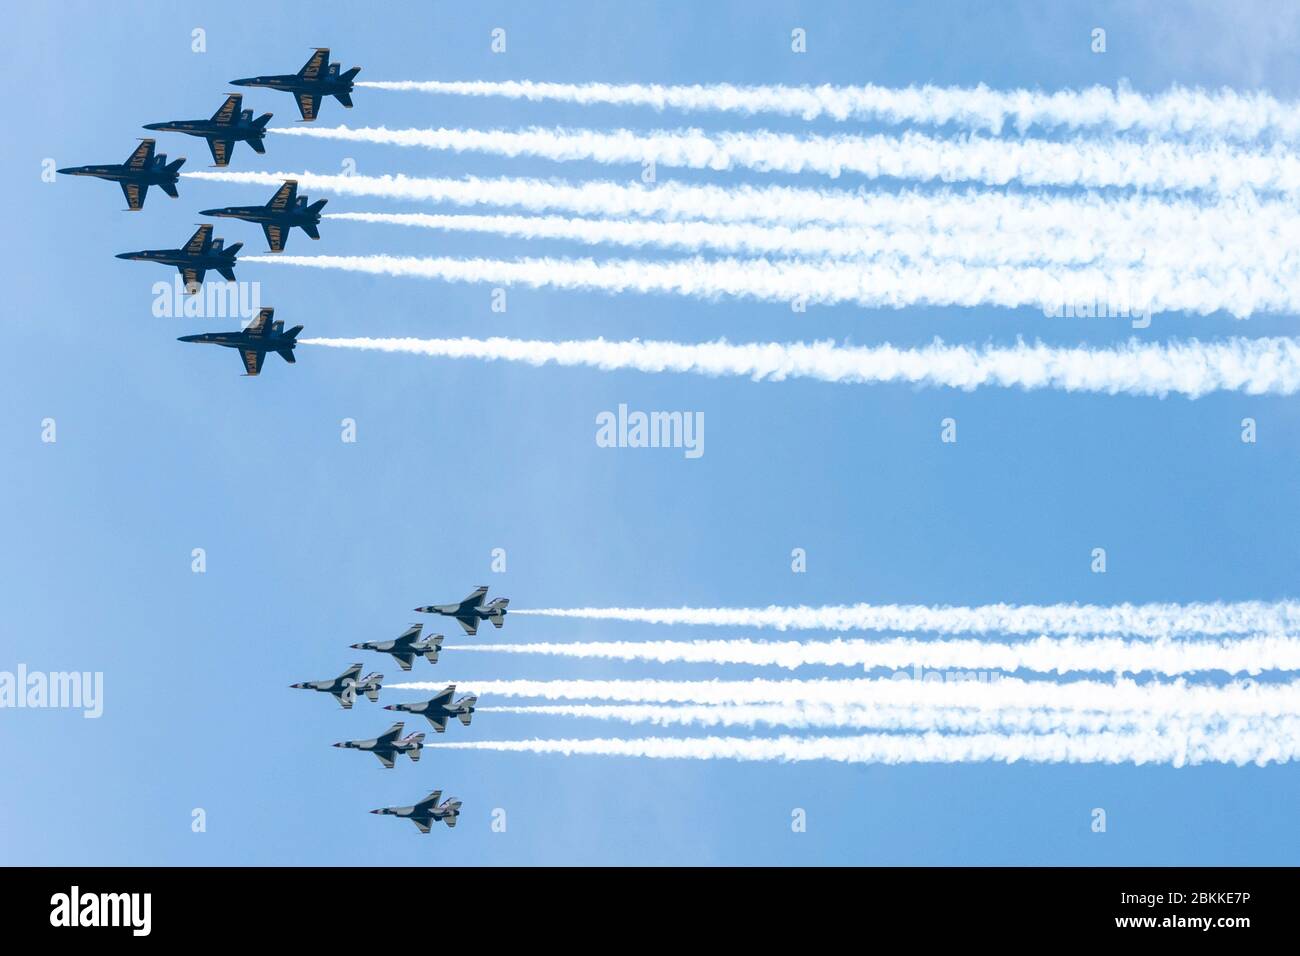 The U.S. Air Force Air Demonstration Squadron, the Thunderbirds, and the Navy Blue Angels, top, fly in formation over the Washington Monument, during the America Strong flyover May 2, 2020 in Washington, D.C. America Strong is a salute from the Navy and Air Force to recognize healthcare workers, first responders, and other essential personnel in a show of national solidarity during the COVID-19 pandemic. Stock Photo